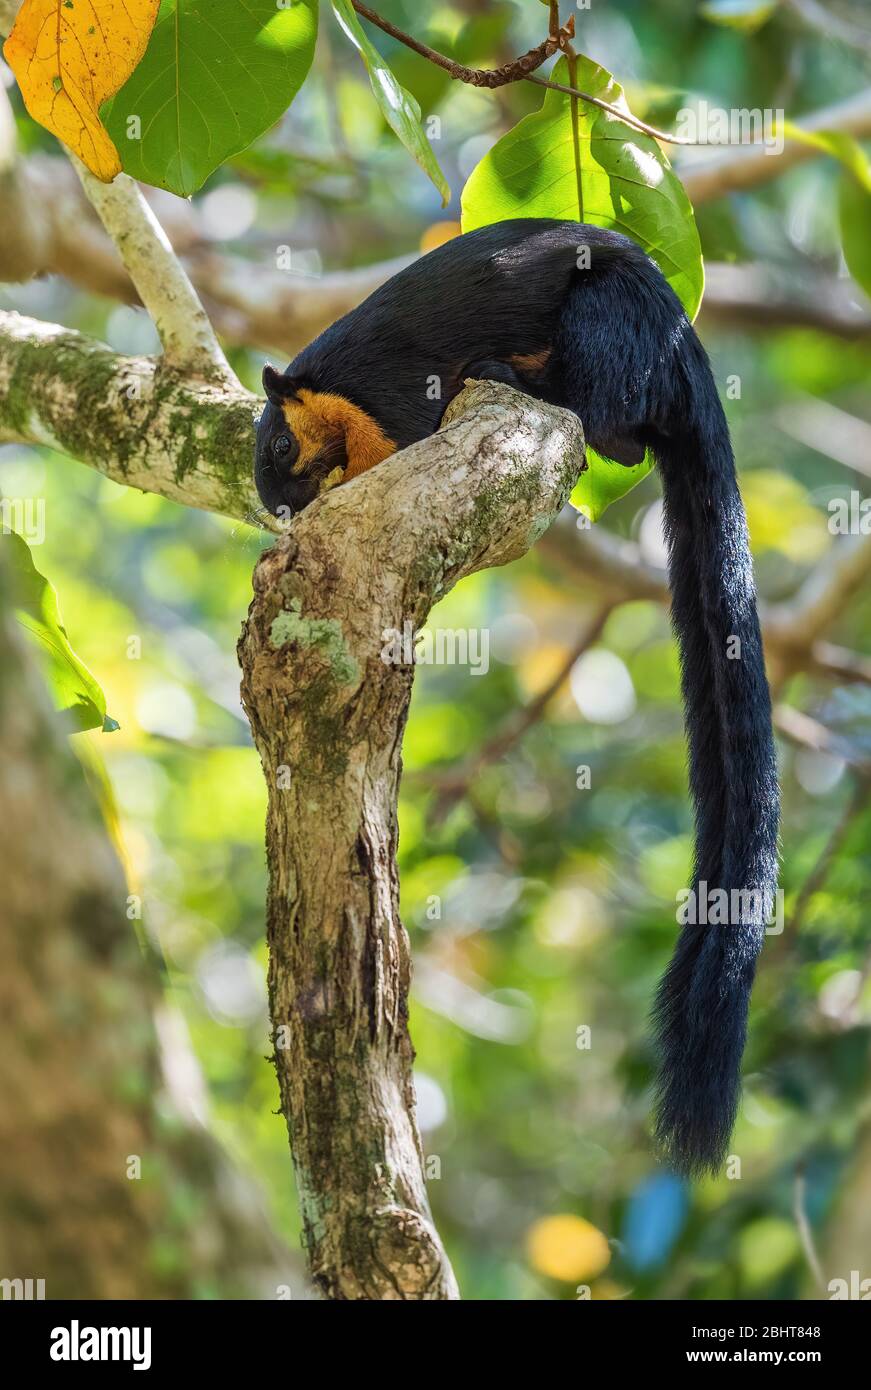 Black Giant Squirrel - Ratufa bicolor, beautiful large squirrel from Southeast Asian forests and woodlands, Penang, Malaysia. Stock Photo